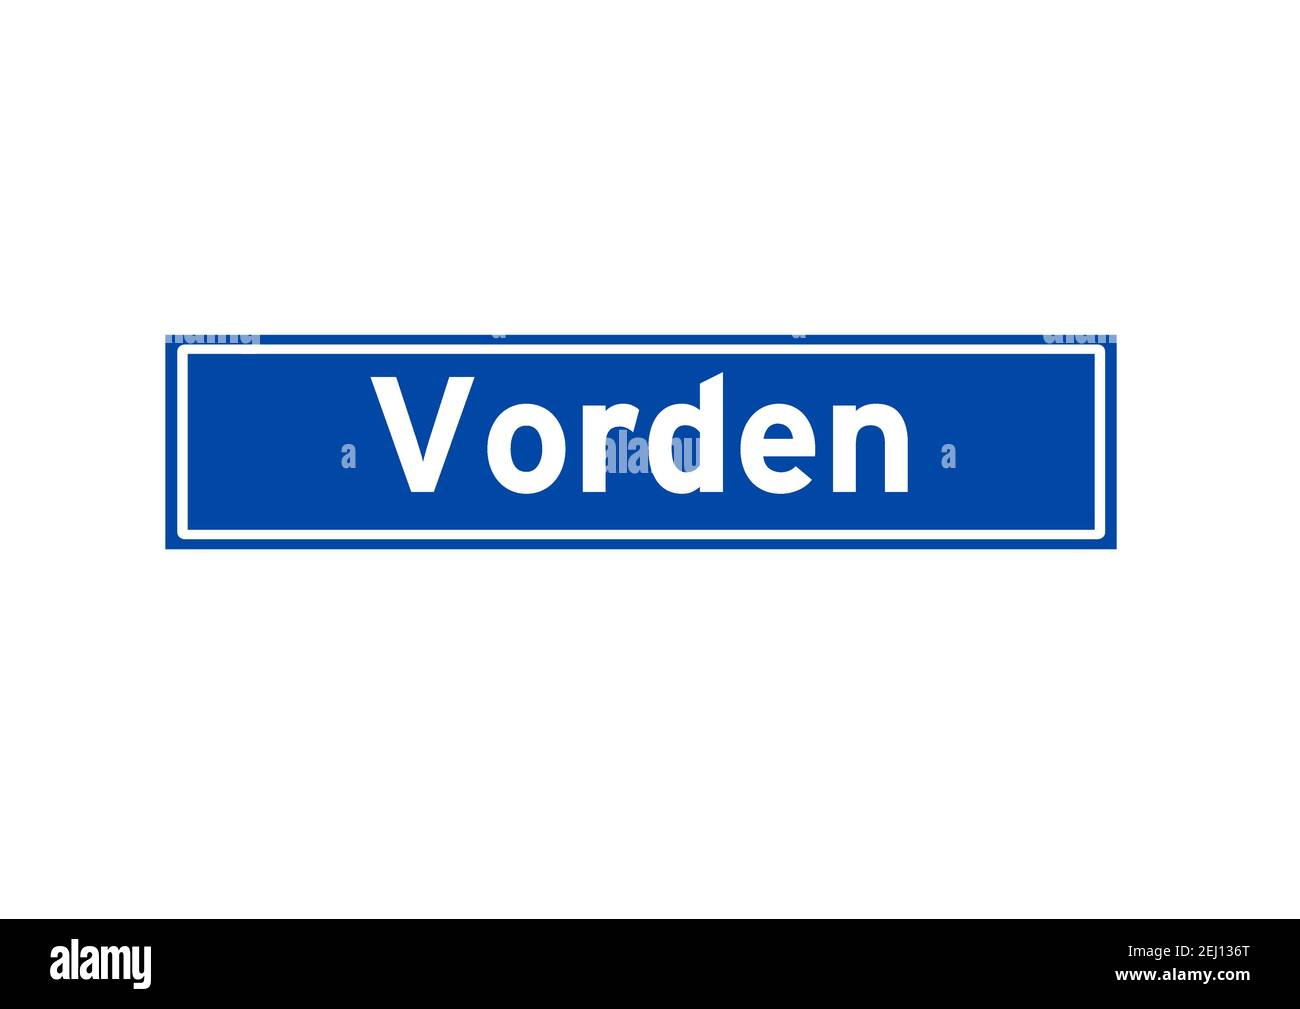 Vorden isolated Dutch place name sign. City sign from the Netherlands. Stock Photo